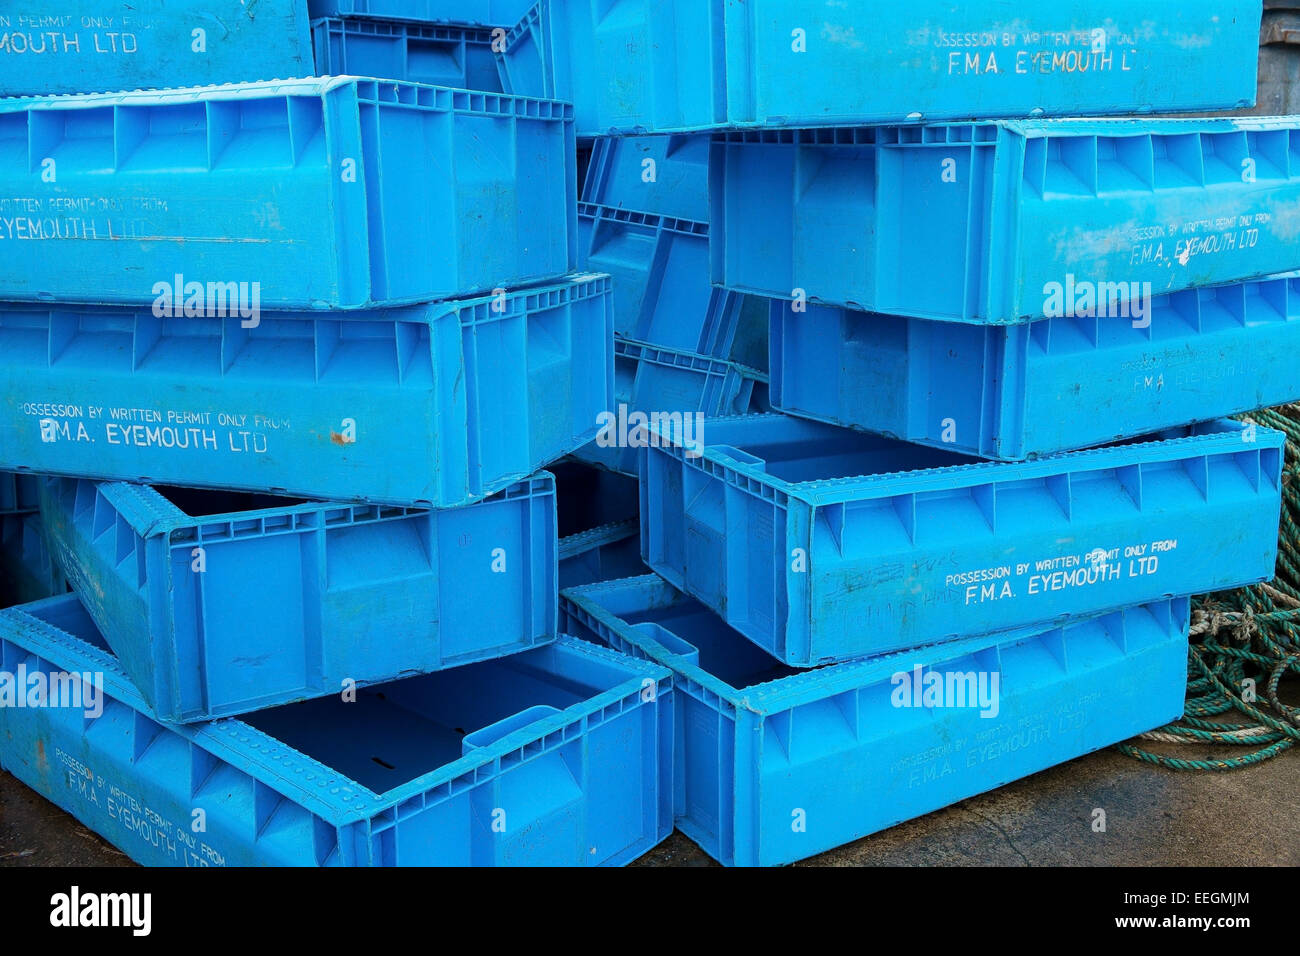 https://c8.alamy.com/comp/EEGMJM/blue-plastic-fish-boxes-stacked-up-at-the-harbour-of-a-fishing-village-EEGMJM.jpg